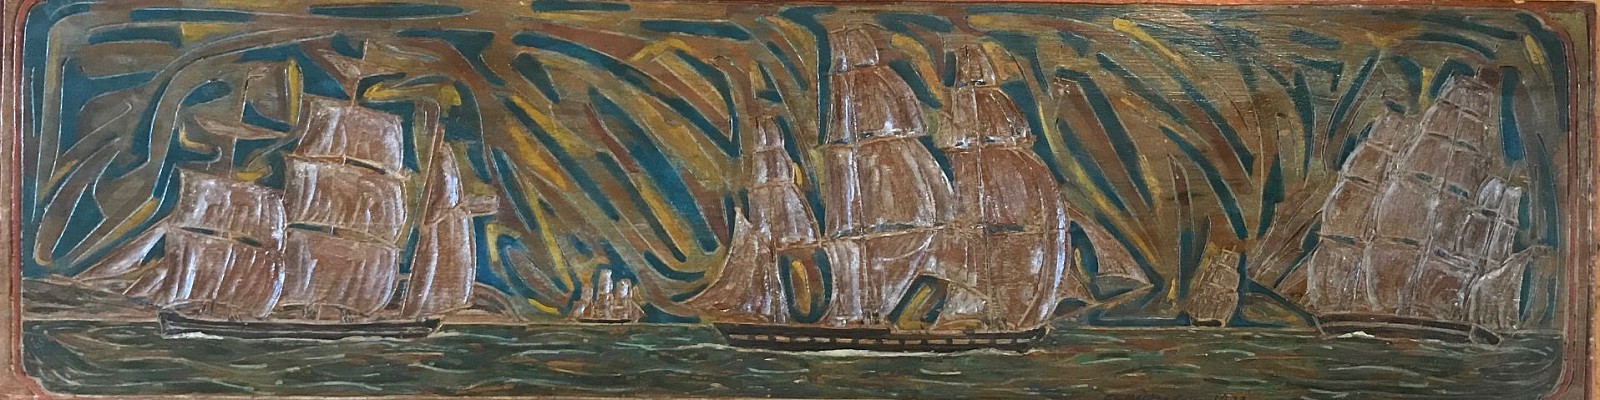 Elmer Livingston MacRae, Making Harbor, 1923
carved and painted wood, 8 3/4" x 33"
signed E. L. Macrae and dated 1923. l.r.
JCA 6322
$2,000